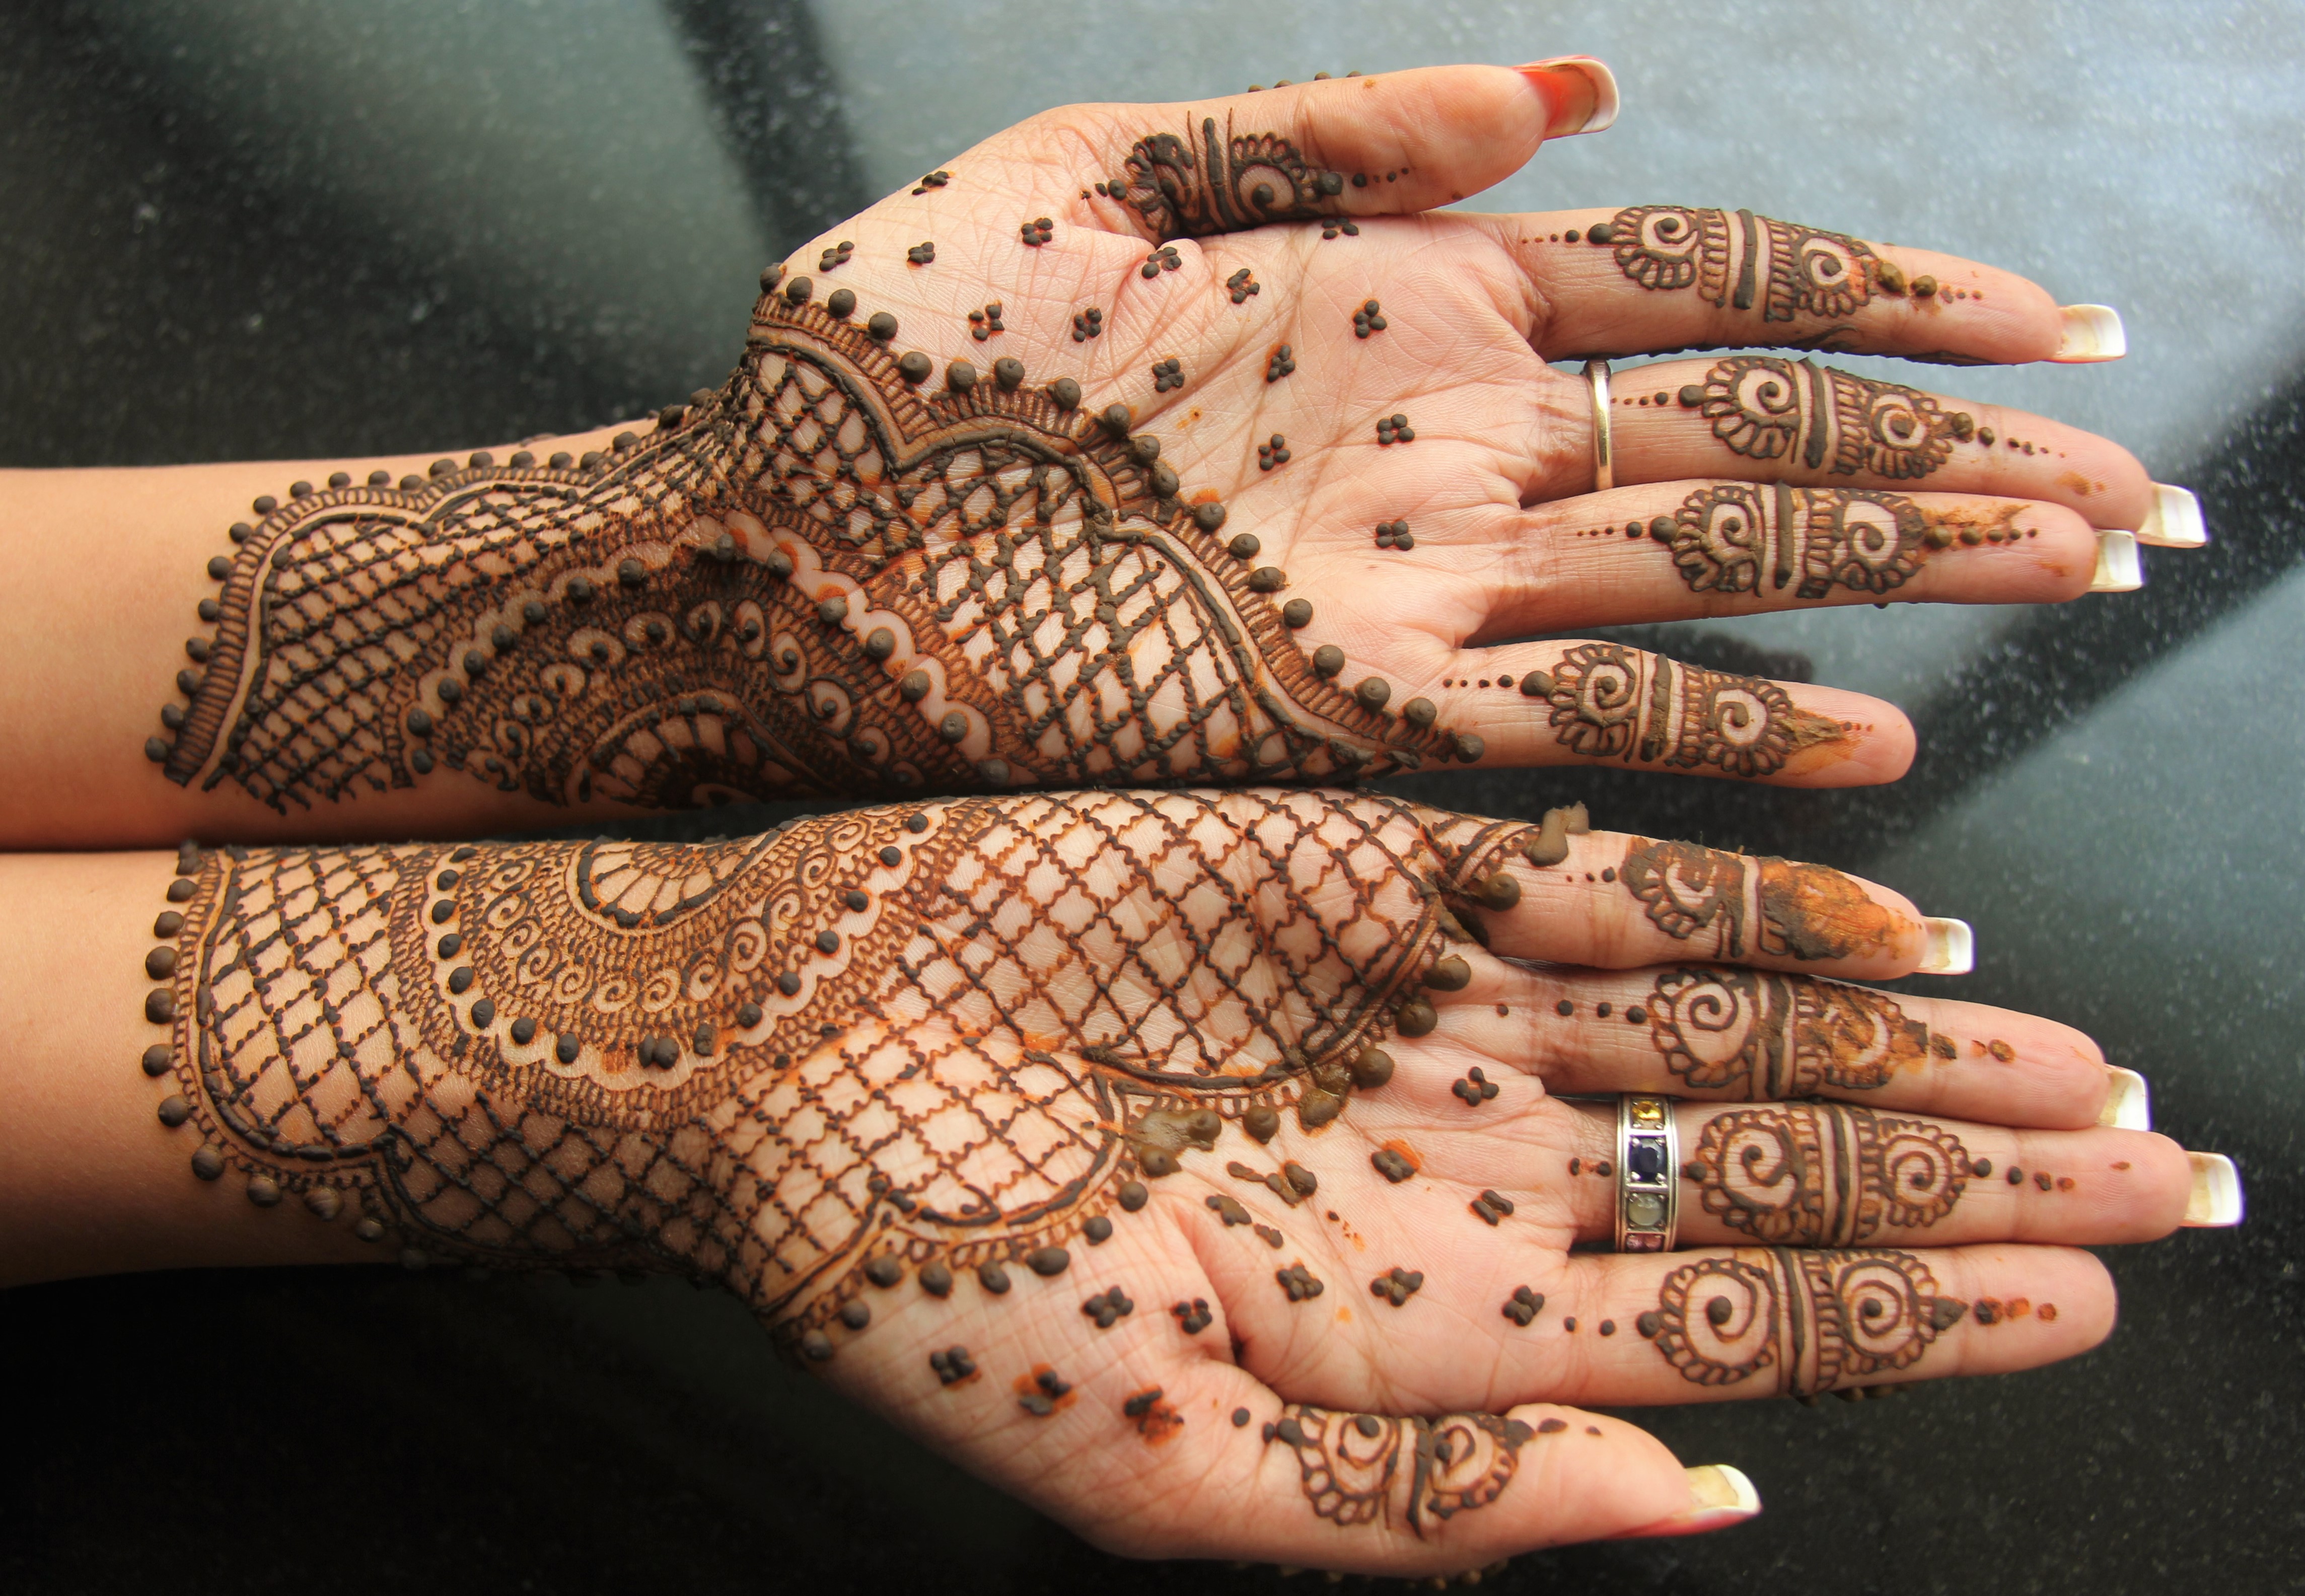 10. Indian Bridal Nail Art Designs for Henna Hands - wide 6